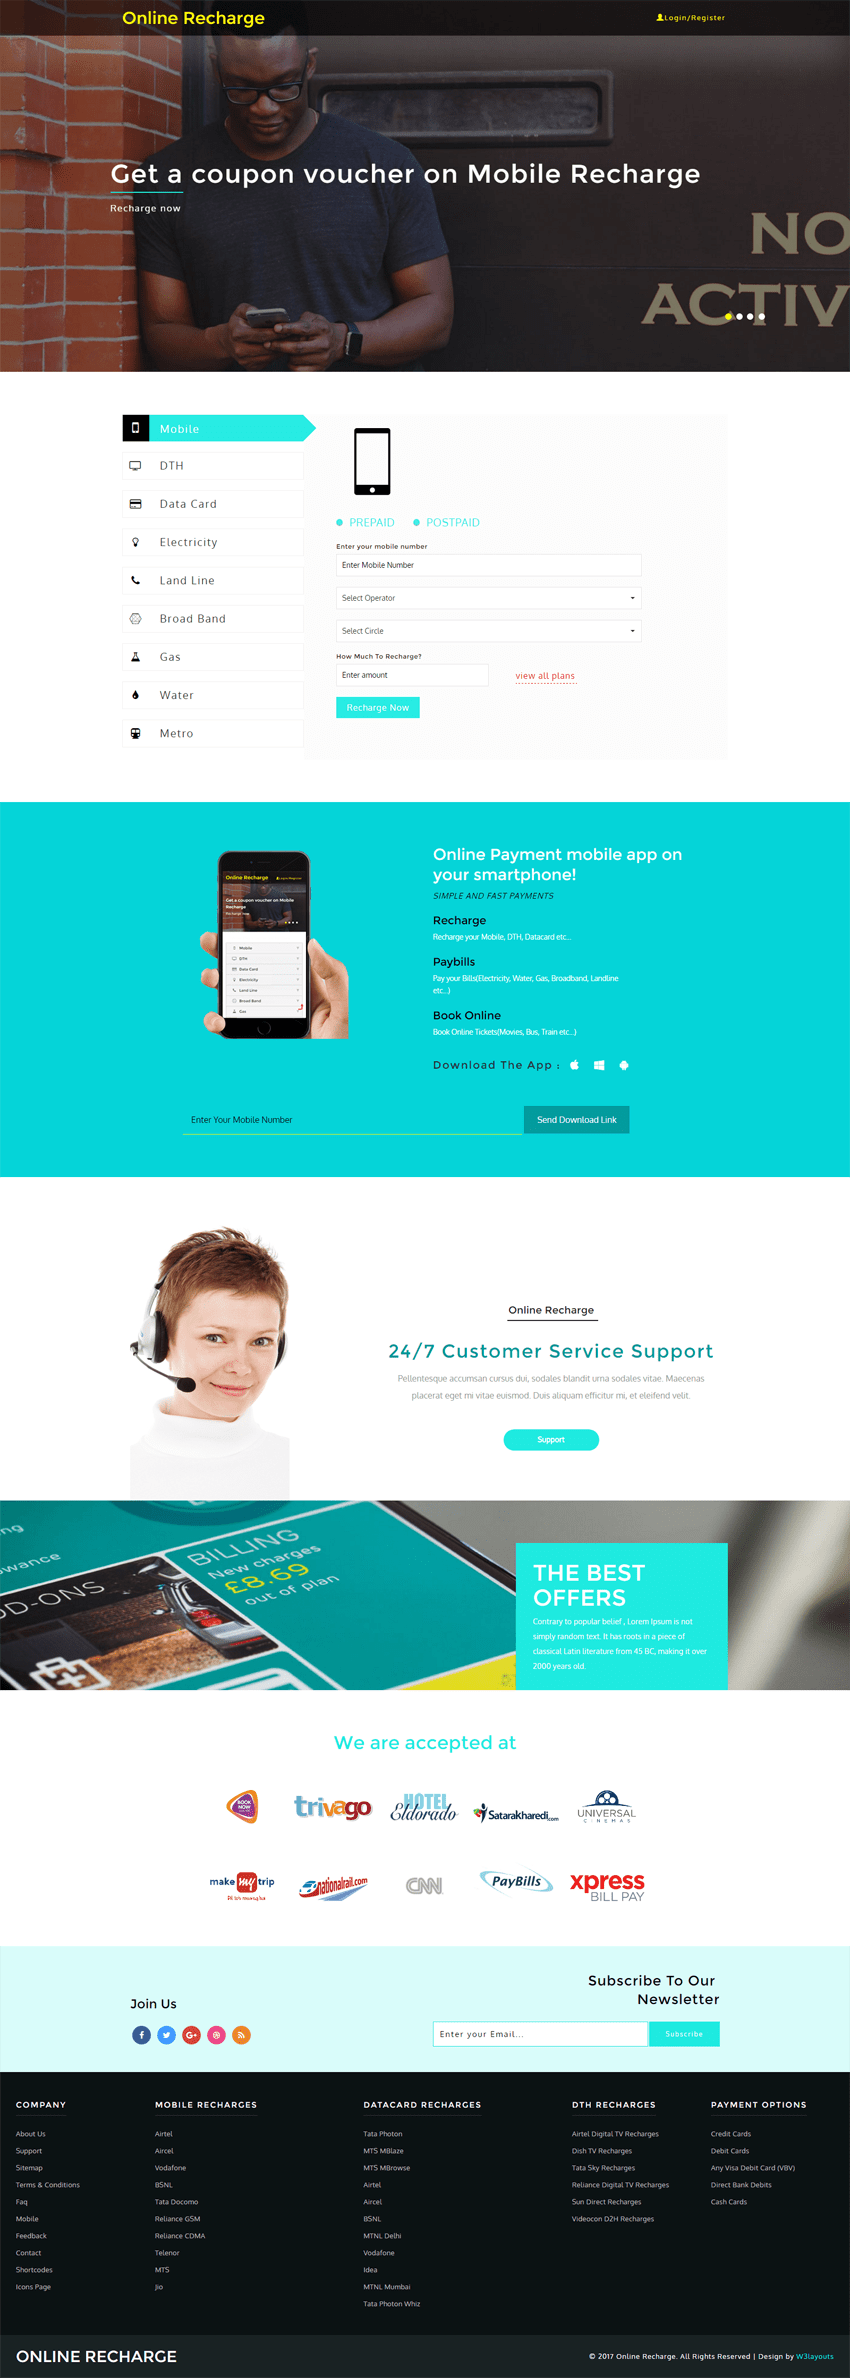 Online Recharge is a Bootstrap respomsive website template for online bill payment sites. This free HTML web template works well for all bill payment sites.